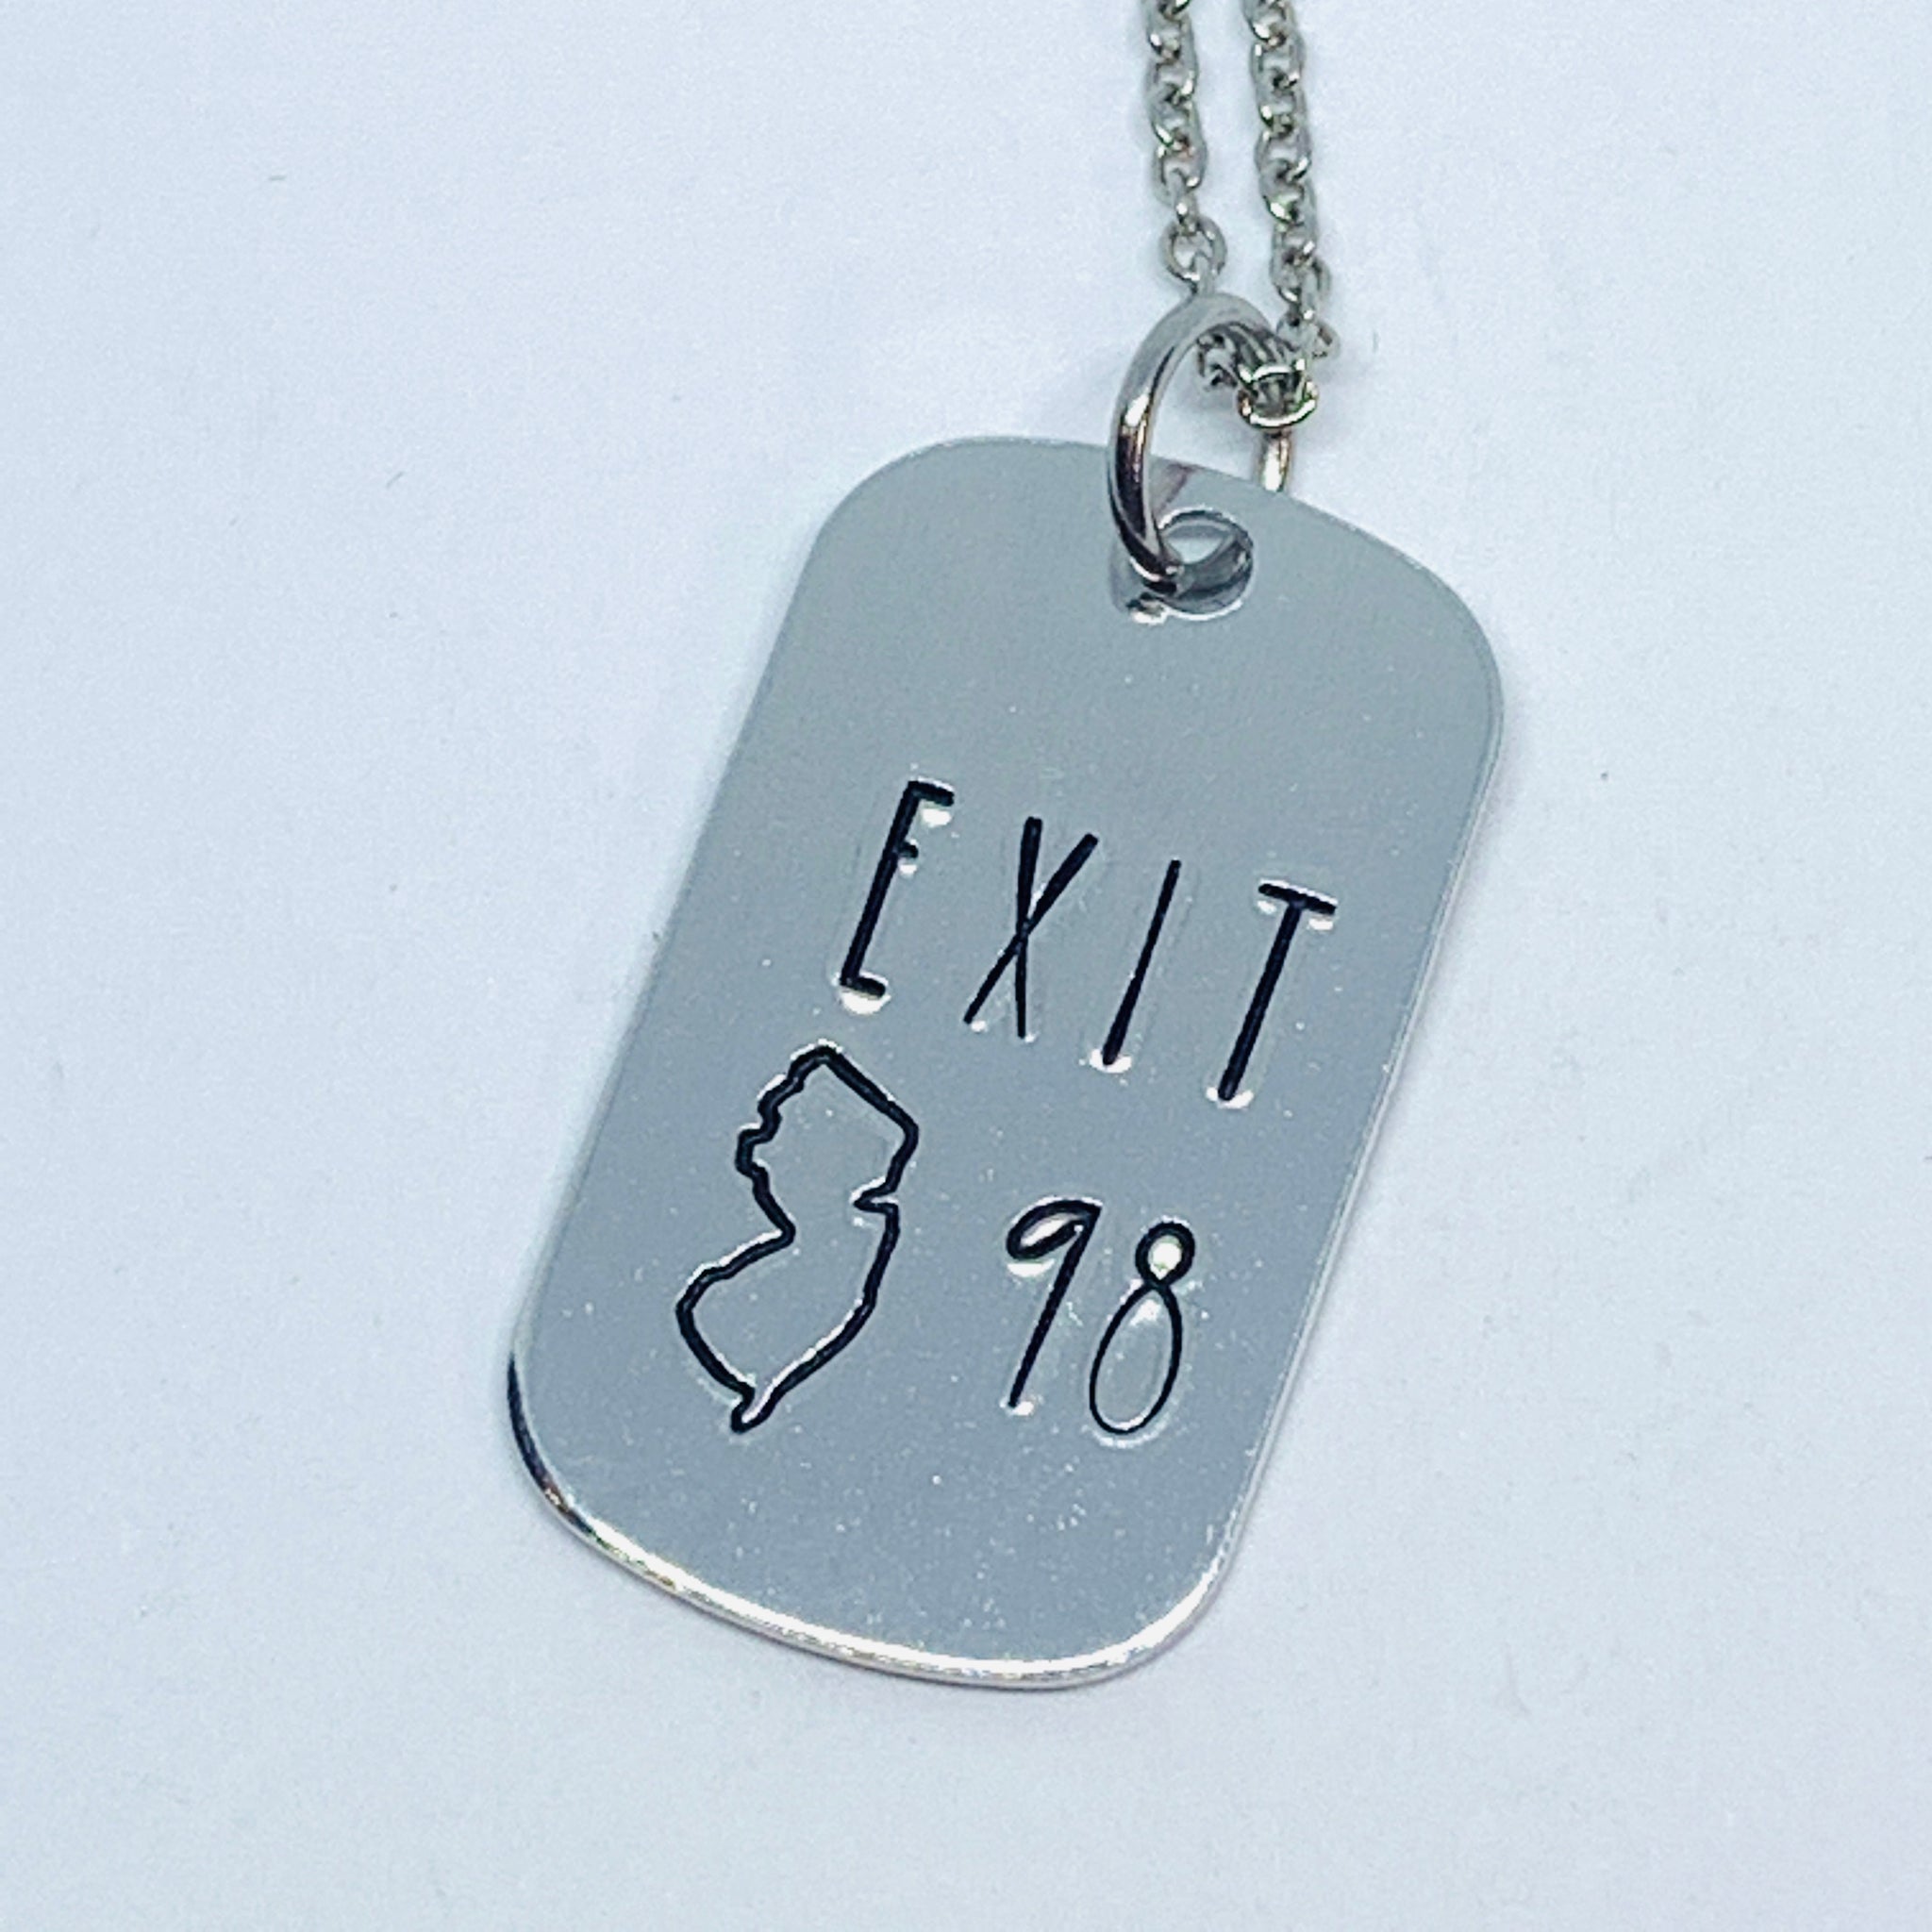 Exit # Tag - Hand Stamped Necklace